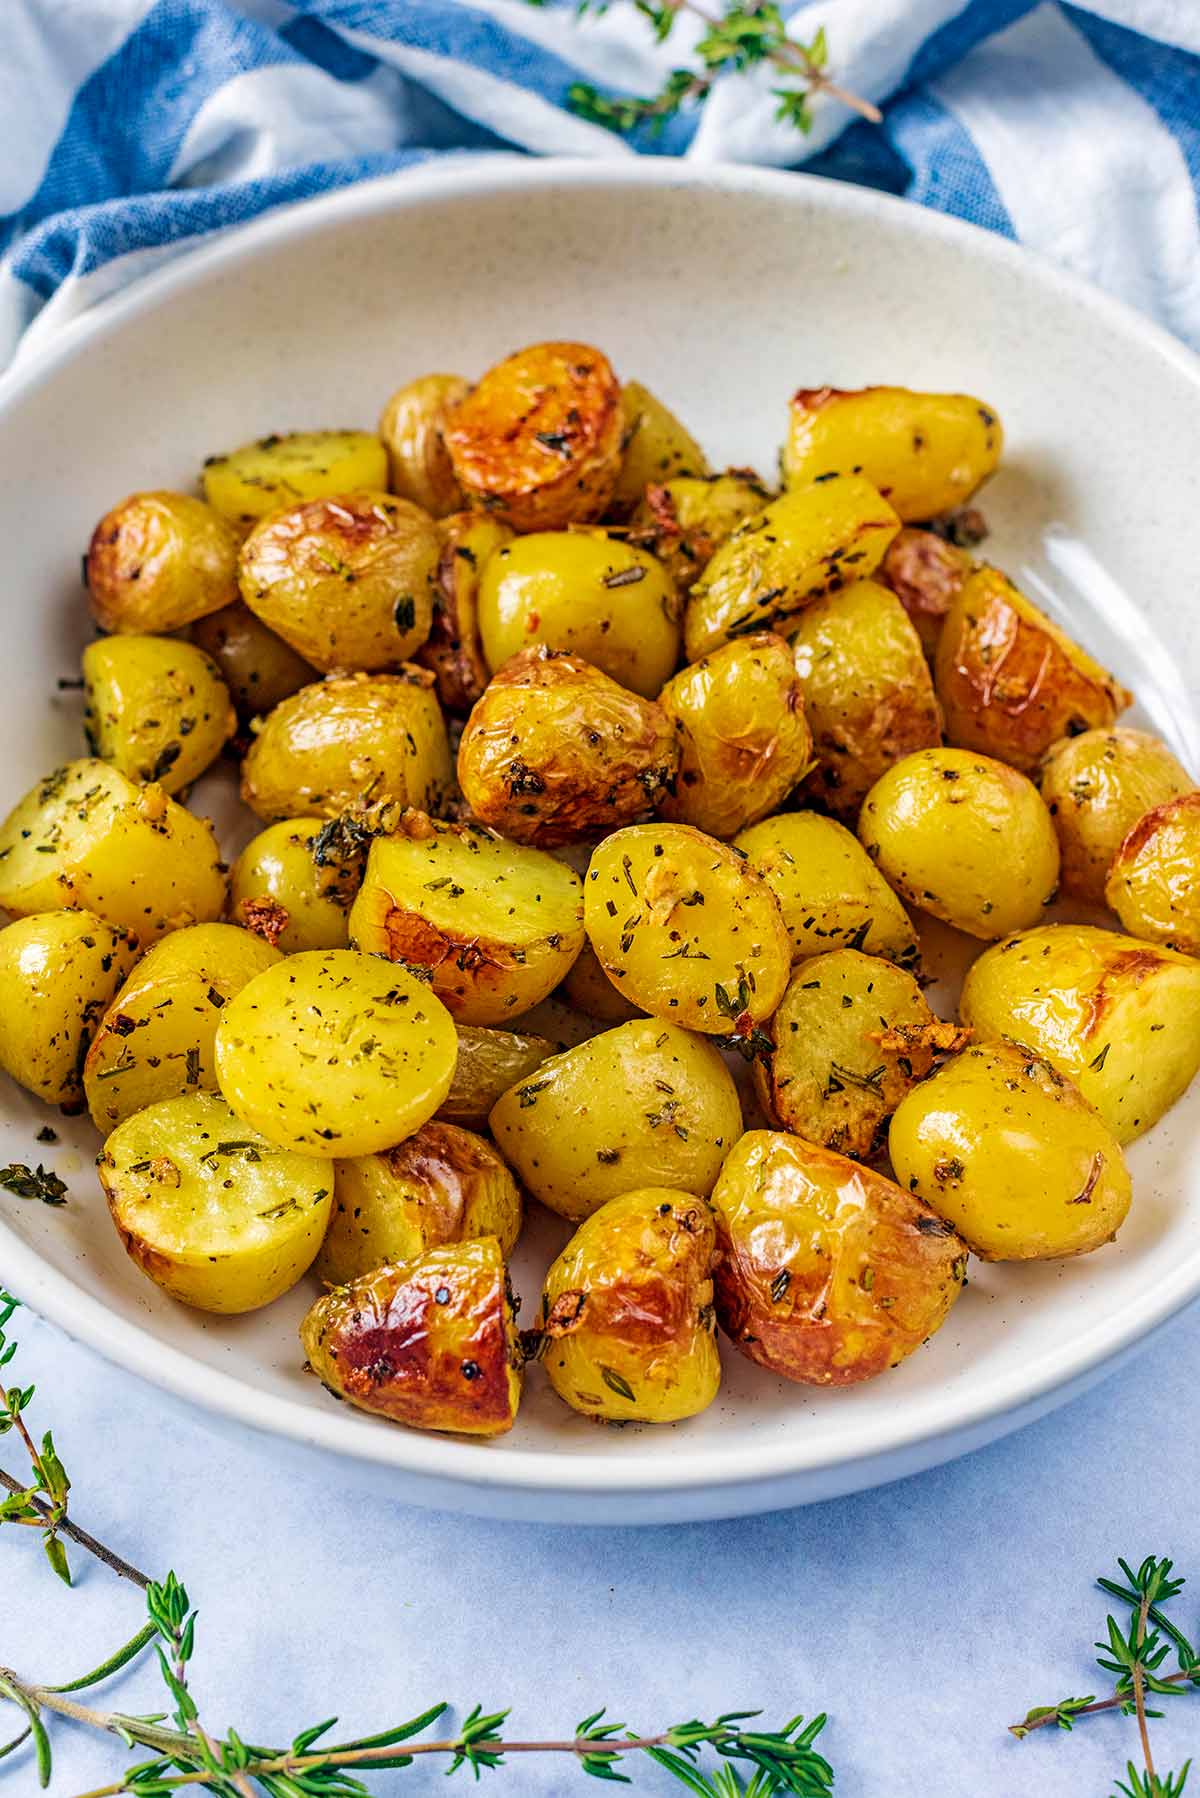 A bowl of roast potatoes in front of a striped towel.